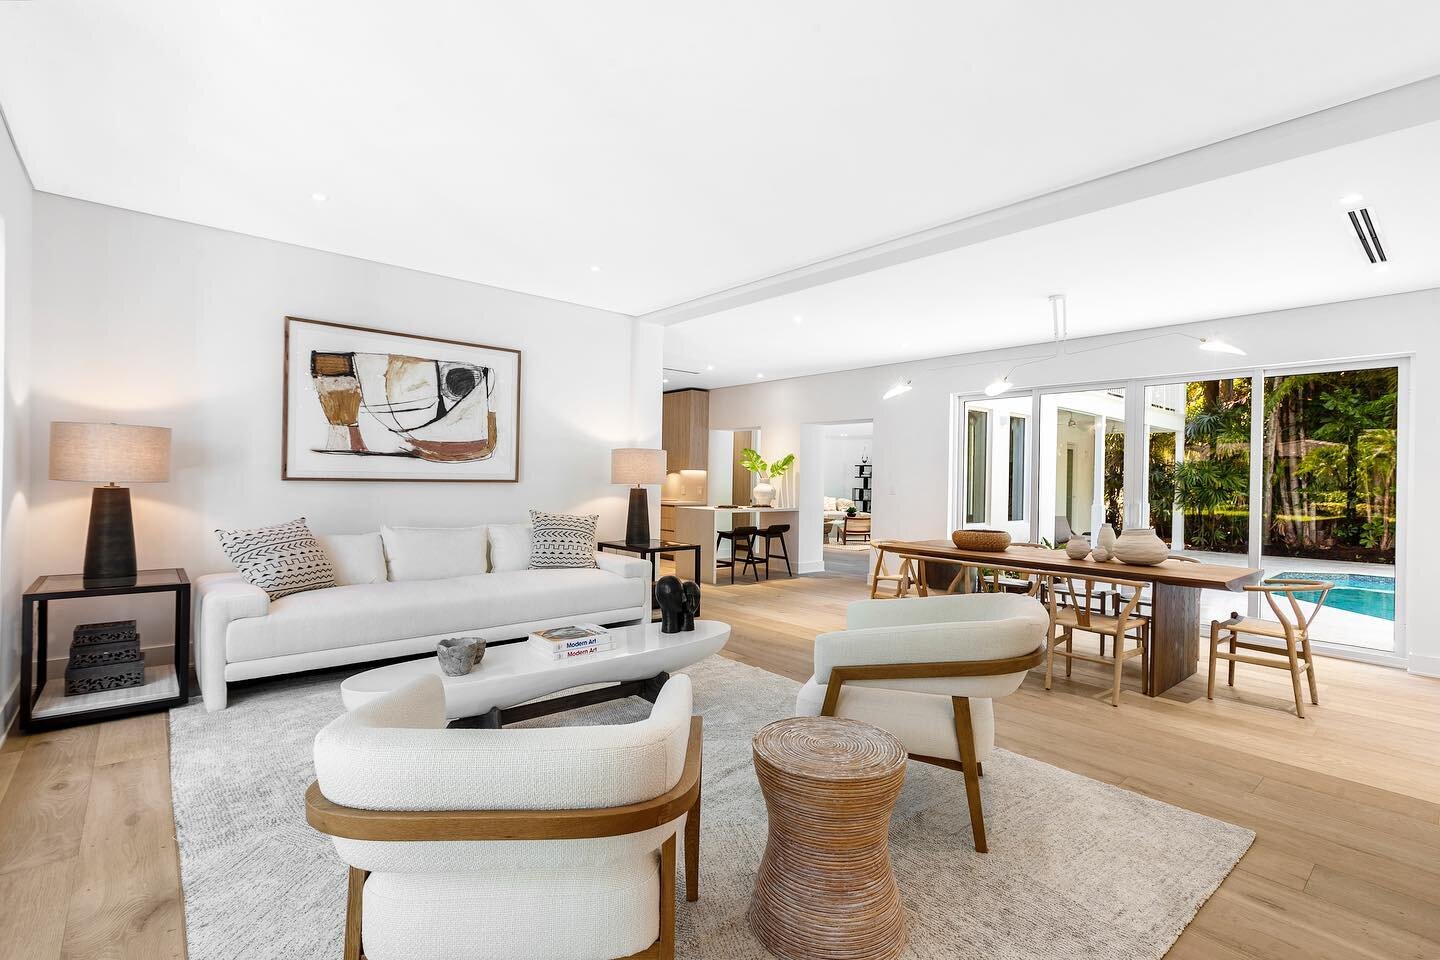 JUST SOLD &ndash; ✨ Meticulously Renovated Coral Gables Designer Residence
 
1015 Bayamo Ave | Coral Gables
4 BD + Office | 4 BA
3,544 Adjusted SF | 9,007 SF Lot
 
Contact:
The Schwartz Team
Compass Florida
Minette Schwartz - 305-439-6628 - minette@t